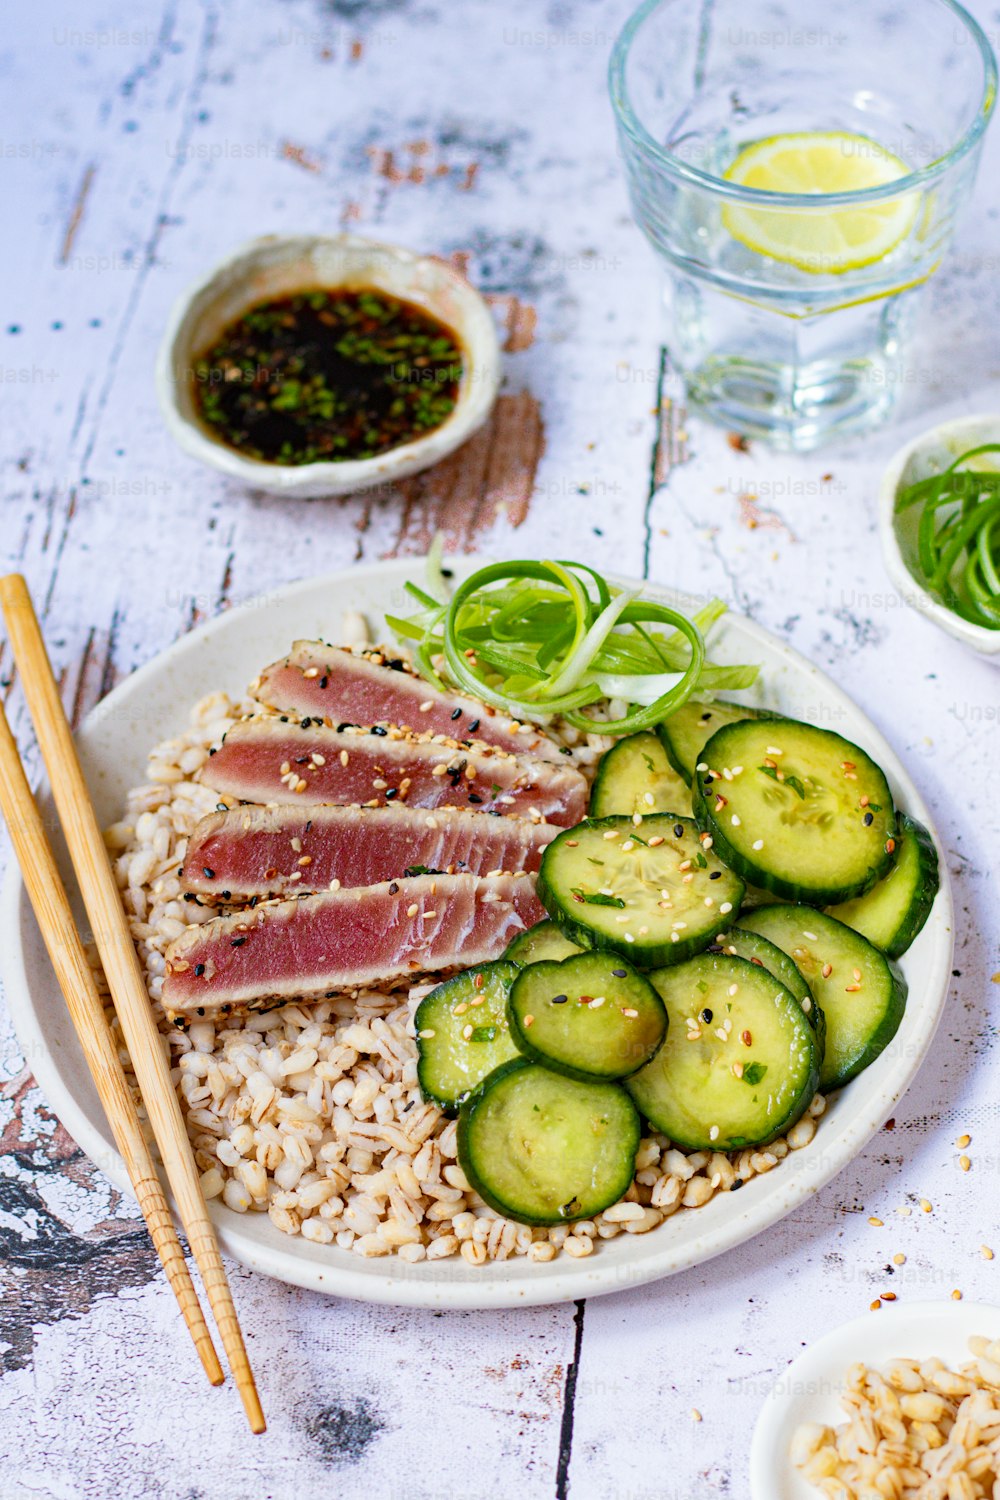 a plate of food with meat, rice, and cucumbers